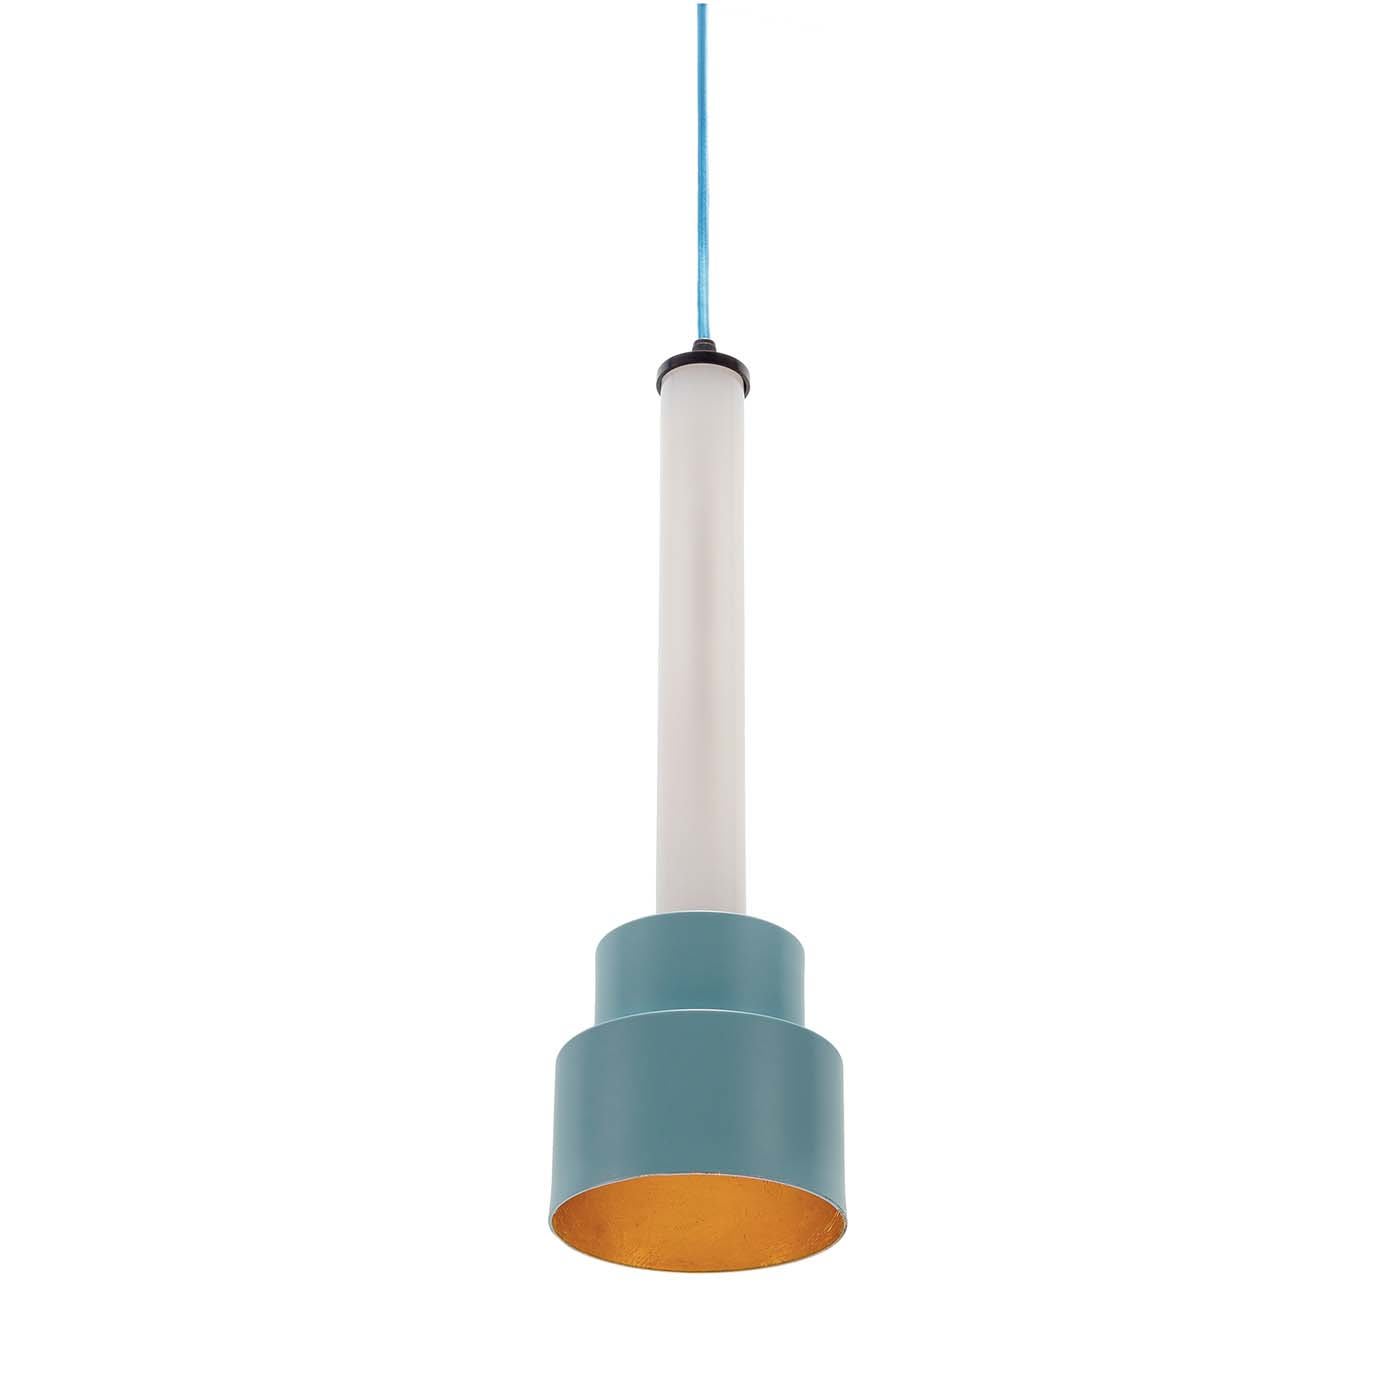 B'Anthology N. 5 Turquoise and Gold Leaf Ceiling Lamp - Bronzetto